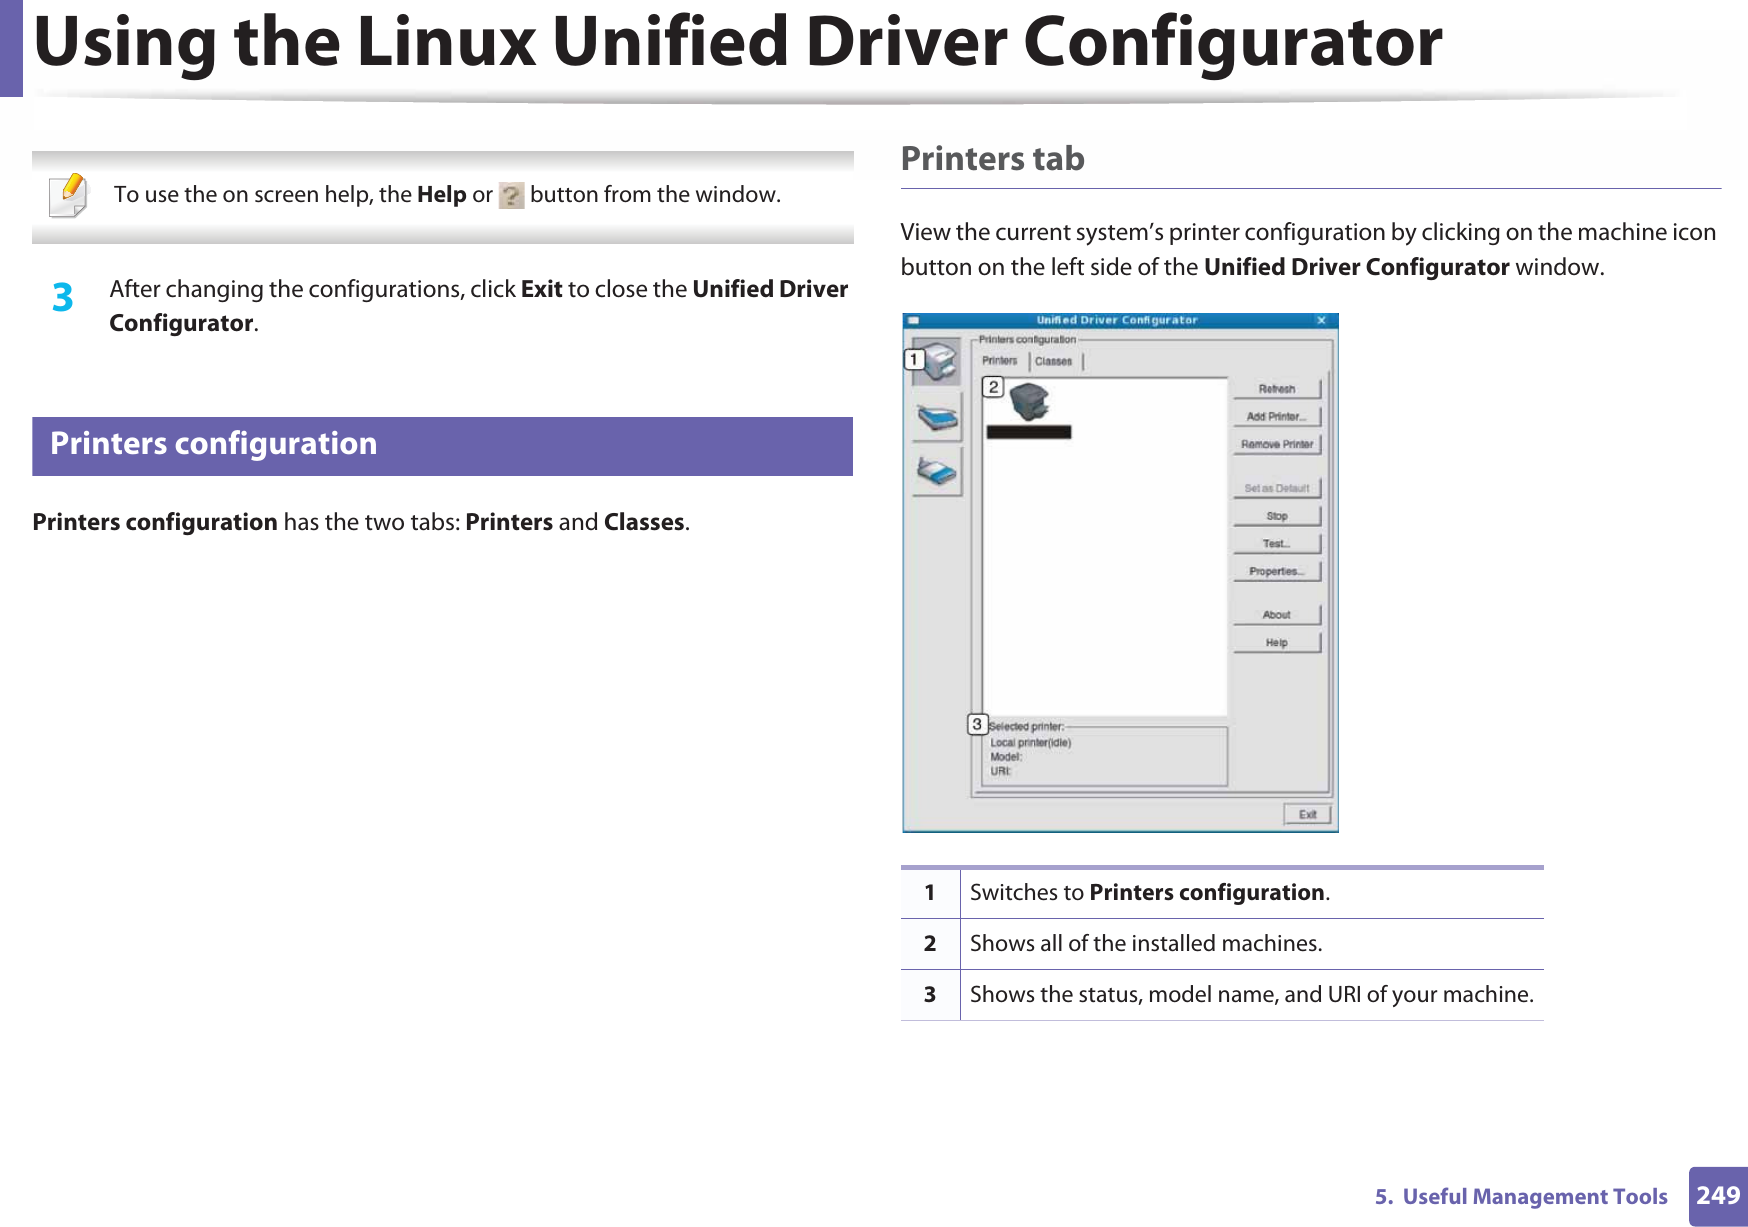 Using the Linux Unified Driver Configurator2495.  Useful Management Tools  To use the on screen help, the Help or   button from the window. 3  After changing the configurations, click Exit to close the Unified Driver Configurator.12 Printers configurationPrinters configuration has the two tabs: Printers and Classes.Printers tabView the current system’s printer configuration by clicking on the machine icon button on the left side of the Unified Driver Configurator window.1Switches to Printers configuration.2Shows all of the installed machines.3Shows the status, model name, and URI of your machine.